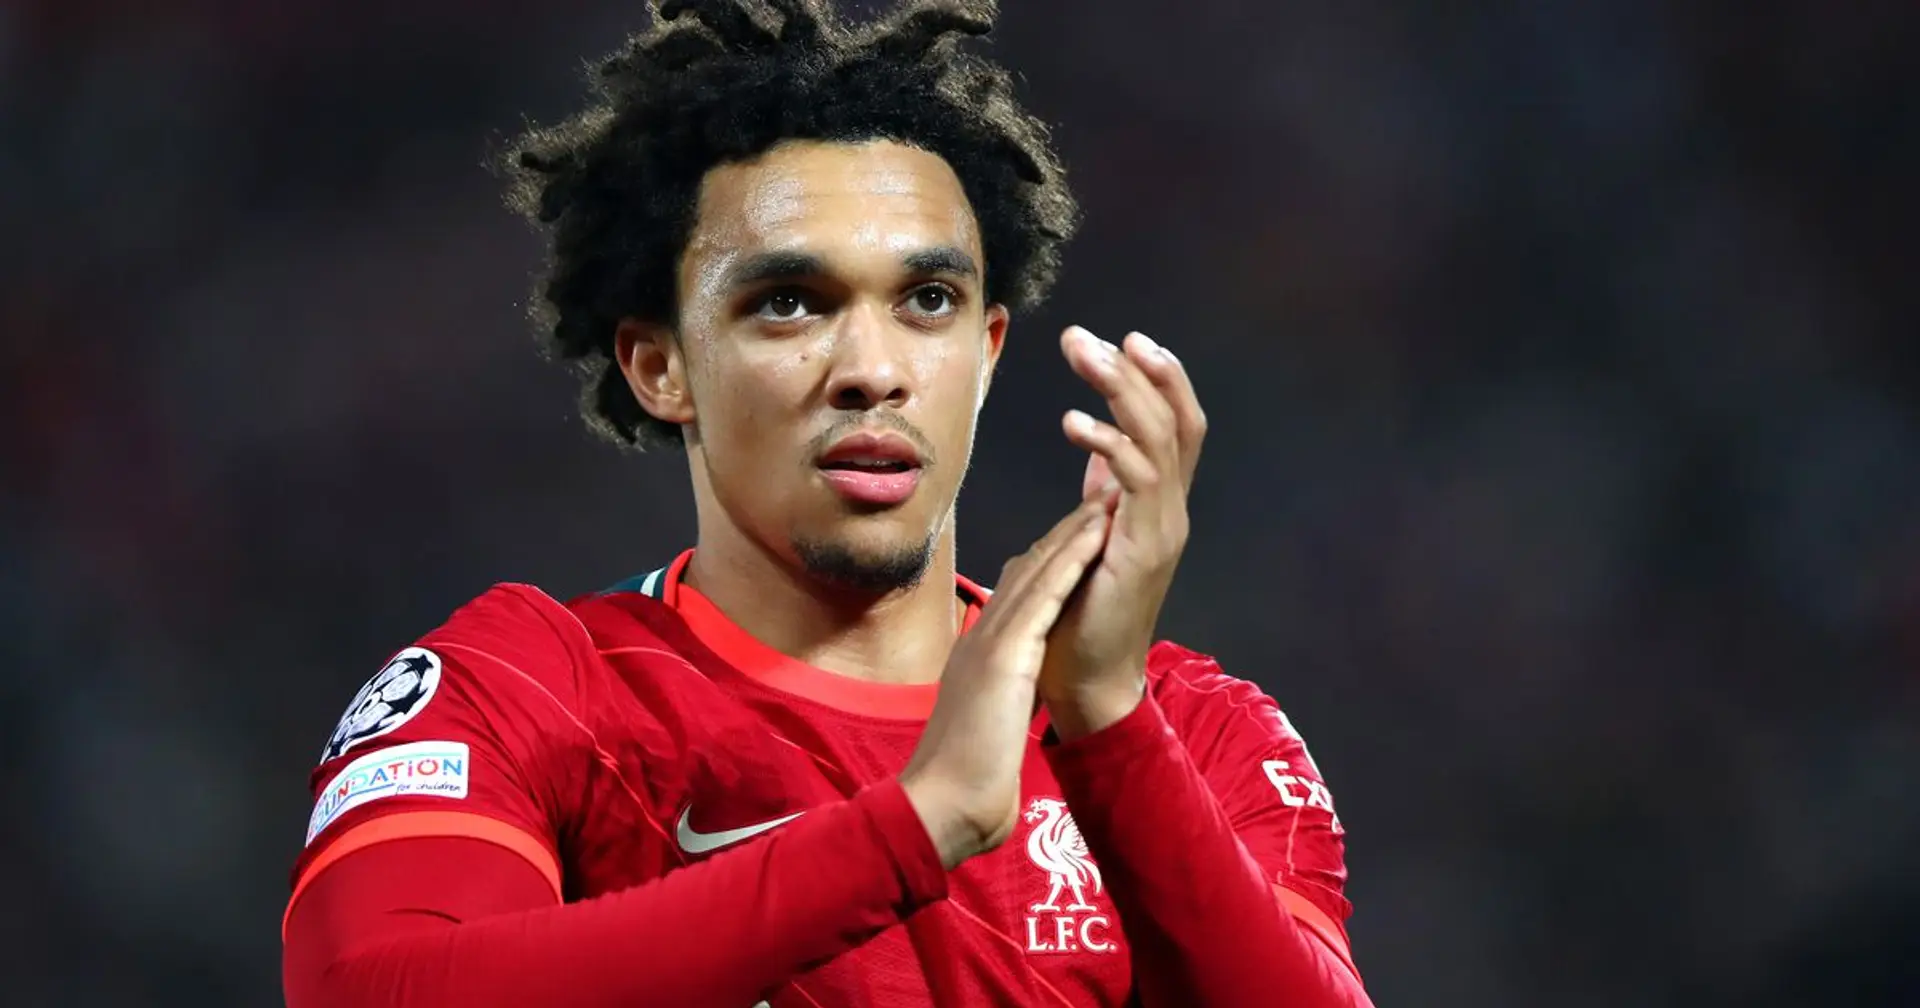 4 season wonder: Trent moves clear in assist record since 18/19 season after Arsenal performance